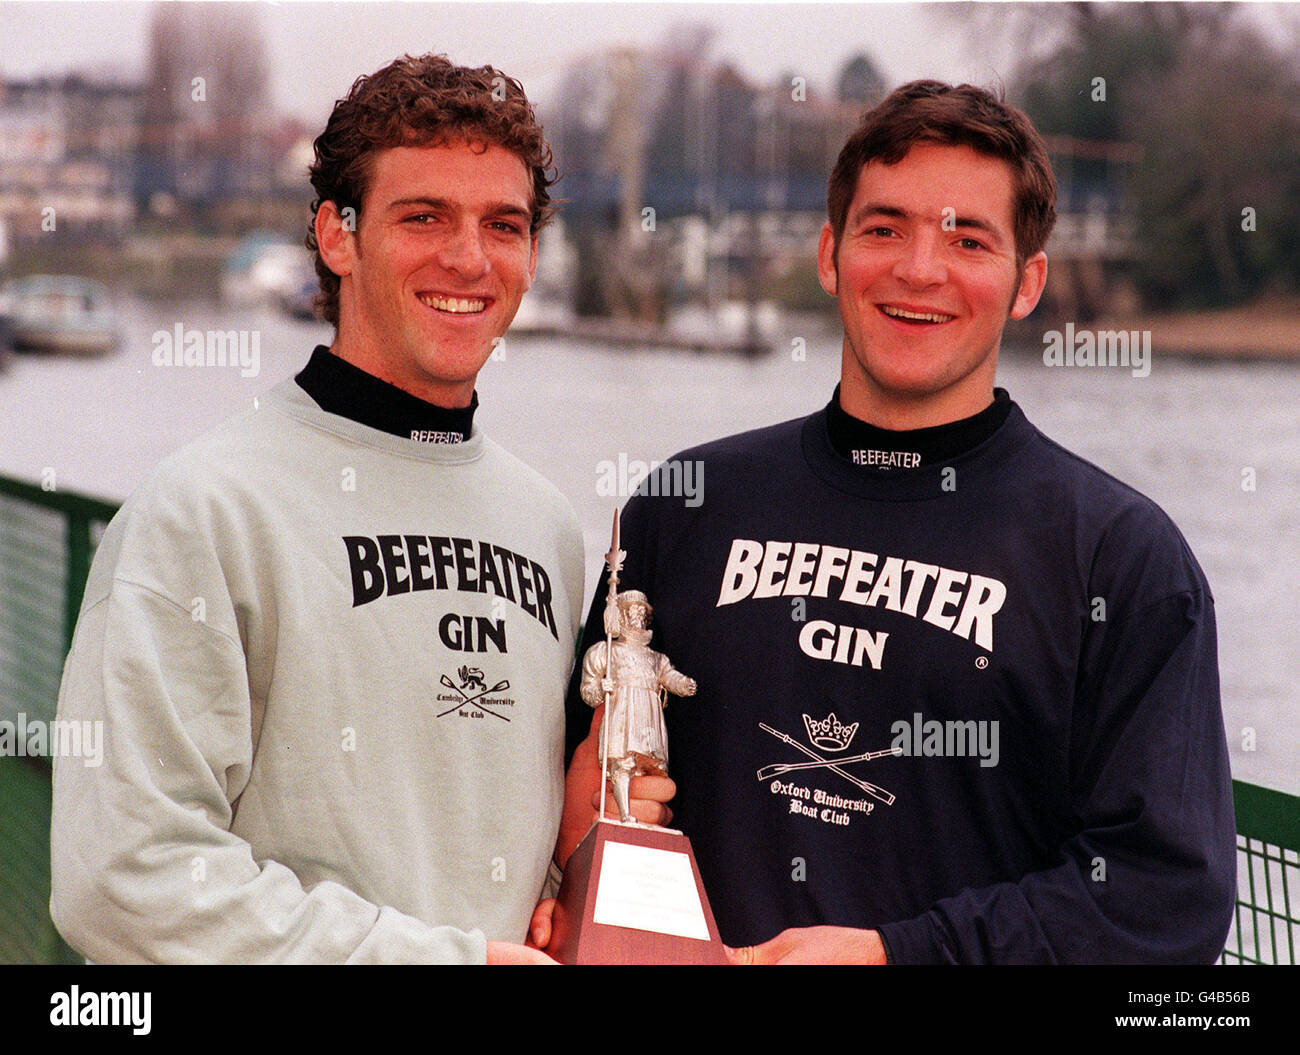 The Oxford President Andrew Lindsay (right) and his Cambridge counterpart, David Cassidy, in Teddington as the teams were announced today (Monday), before the 144th Oxford & Cambridge Boat Race, which takes place on March 28. Photo by John Stillwell. Stock Photo